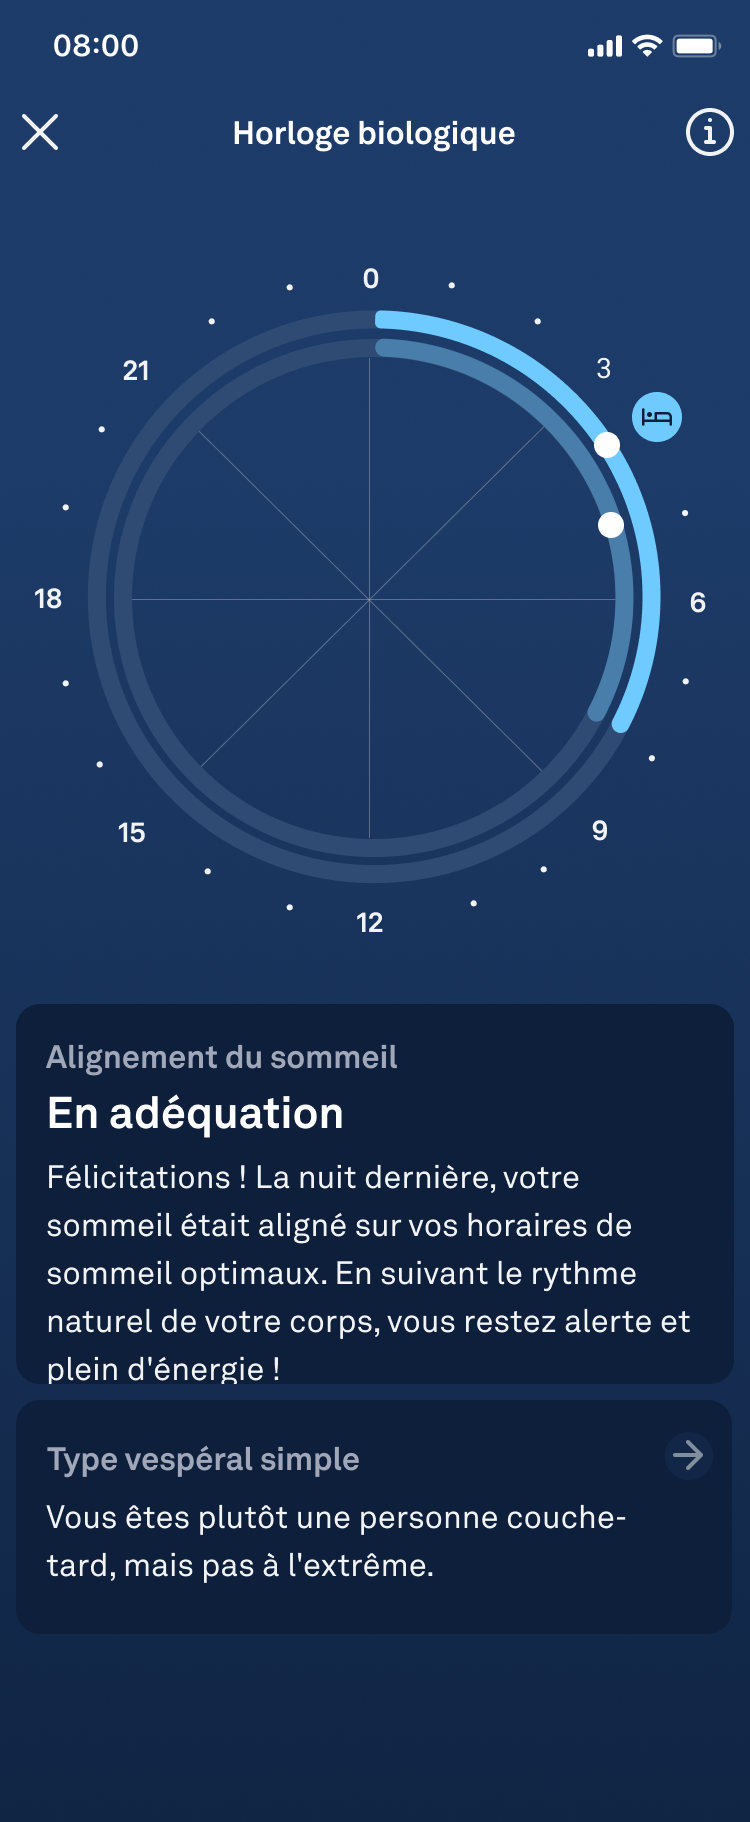 the Body Clock showing chronotype and sleep patterns in alignment